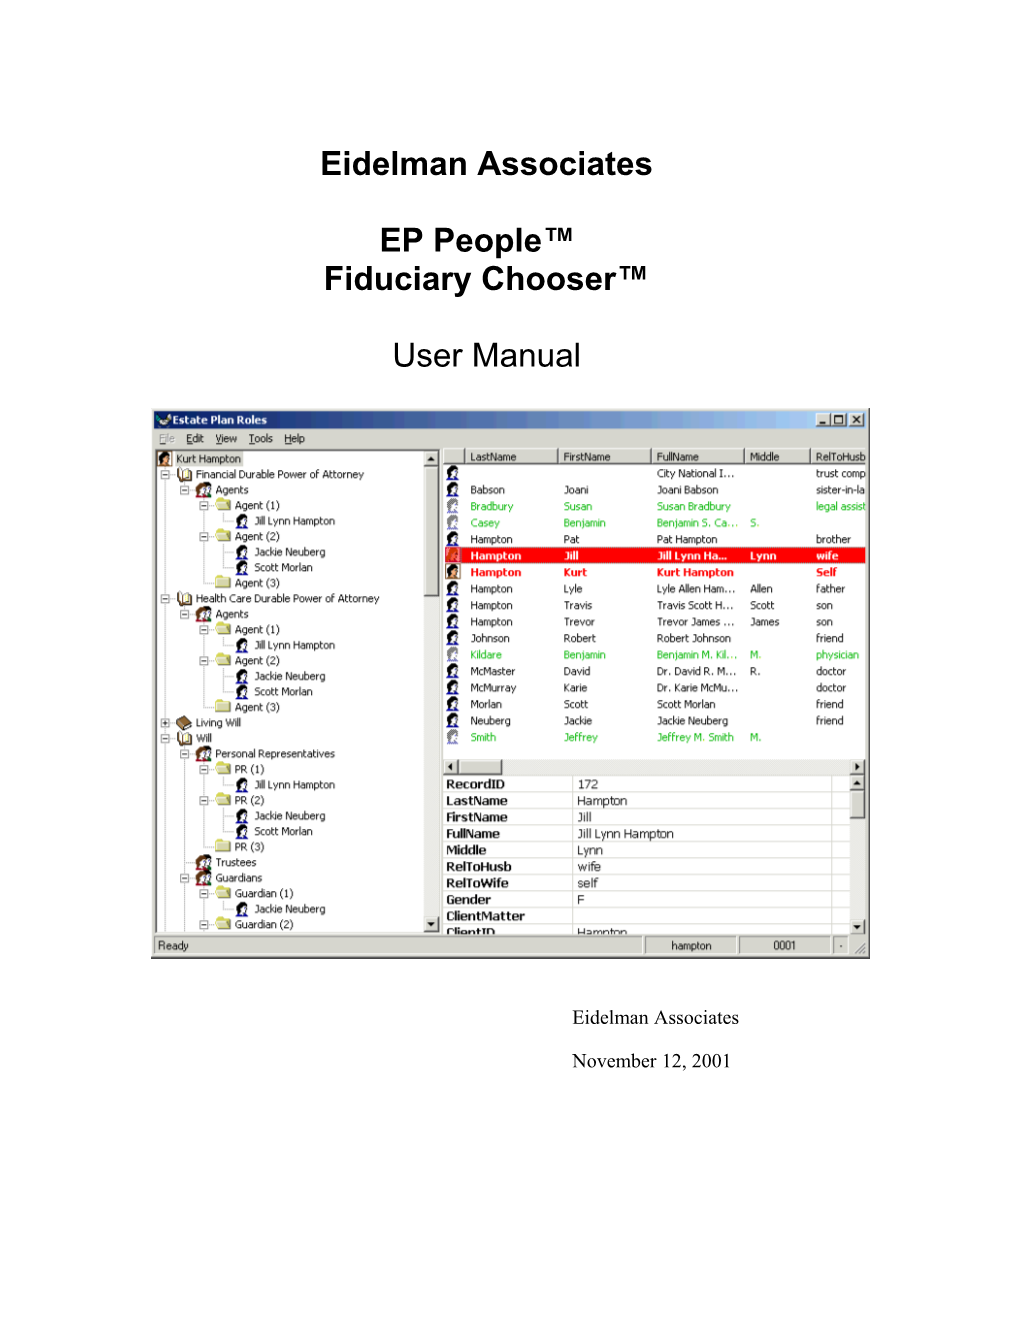 Eppeople User Manual